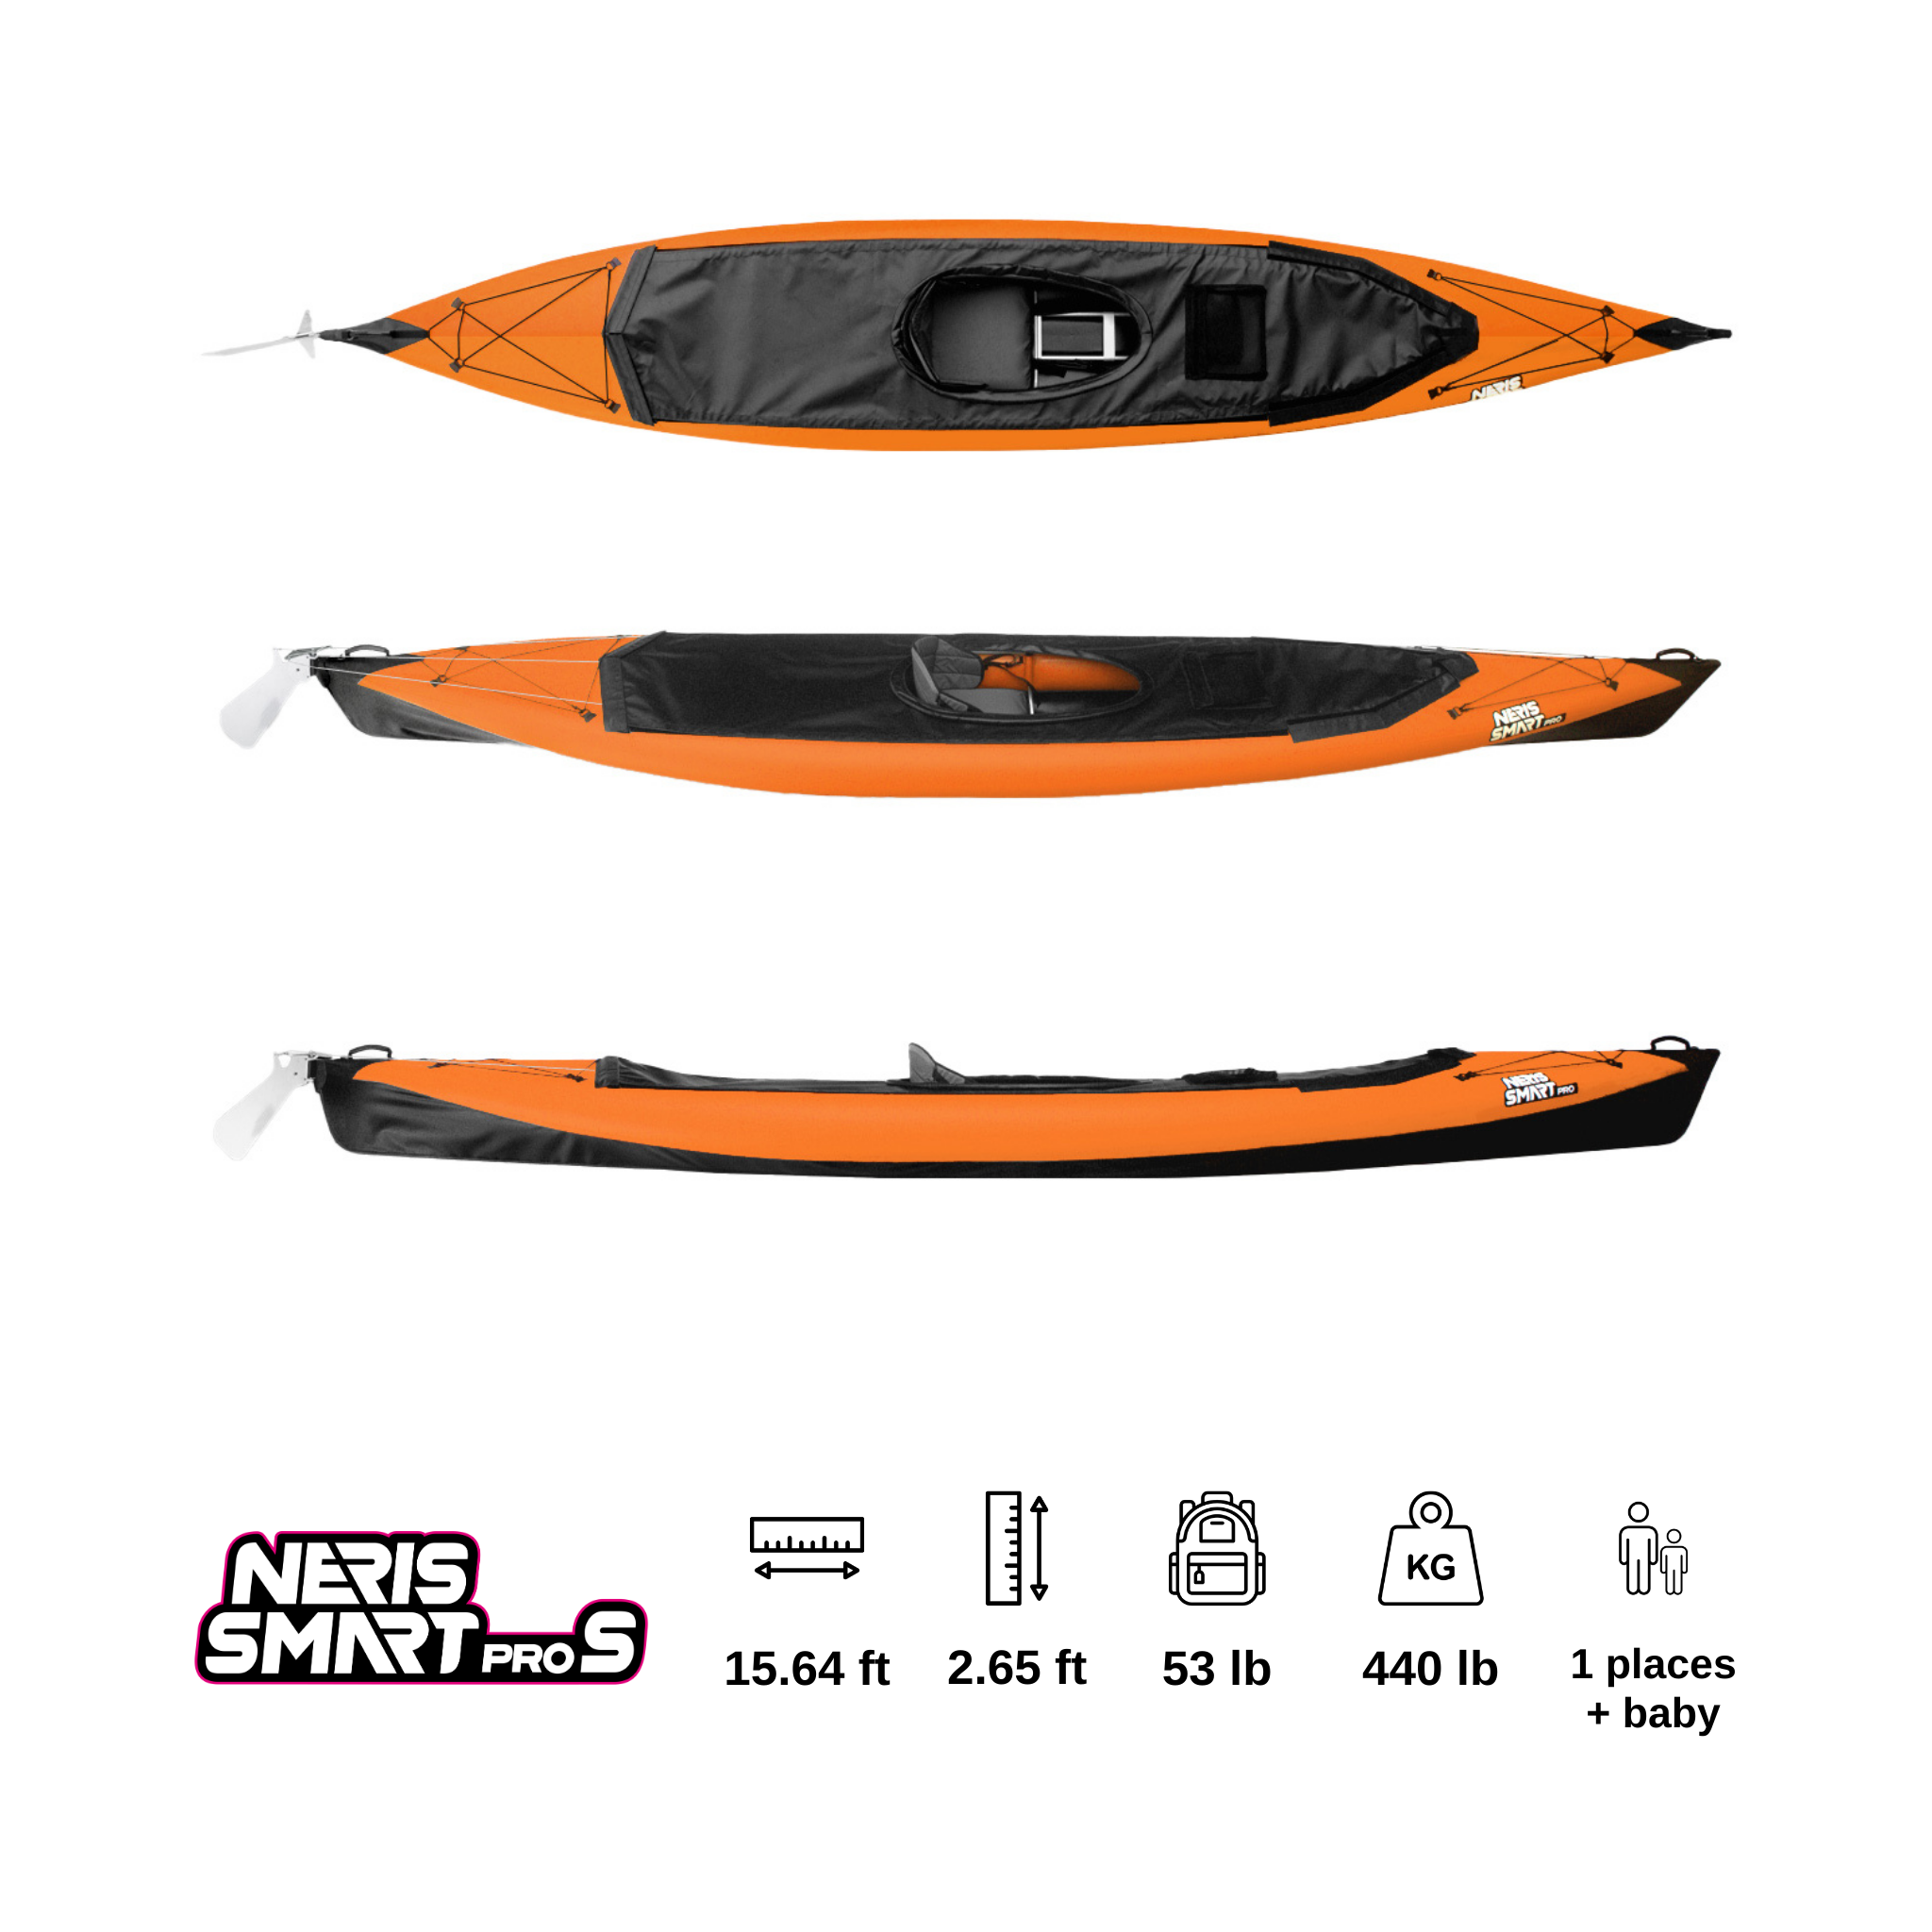 A NERIS Smart Pro S single-seater folding kayak with an eye-catching orange top, perfect for individual adventurers seeking a balance of performance and convenience